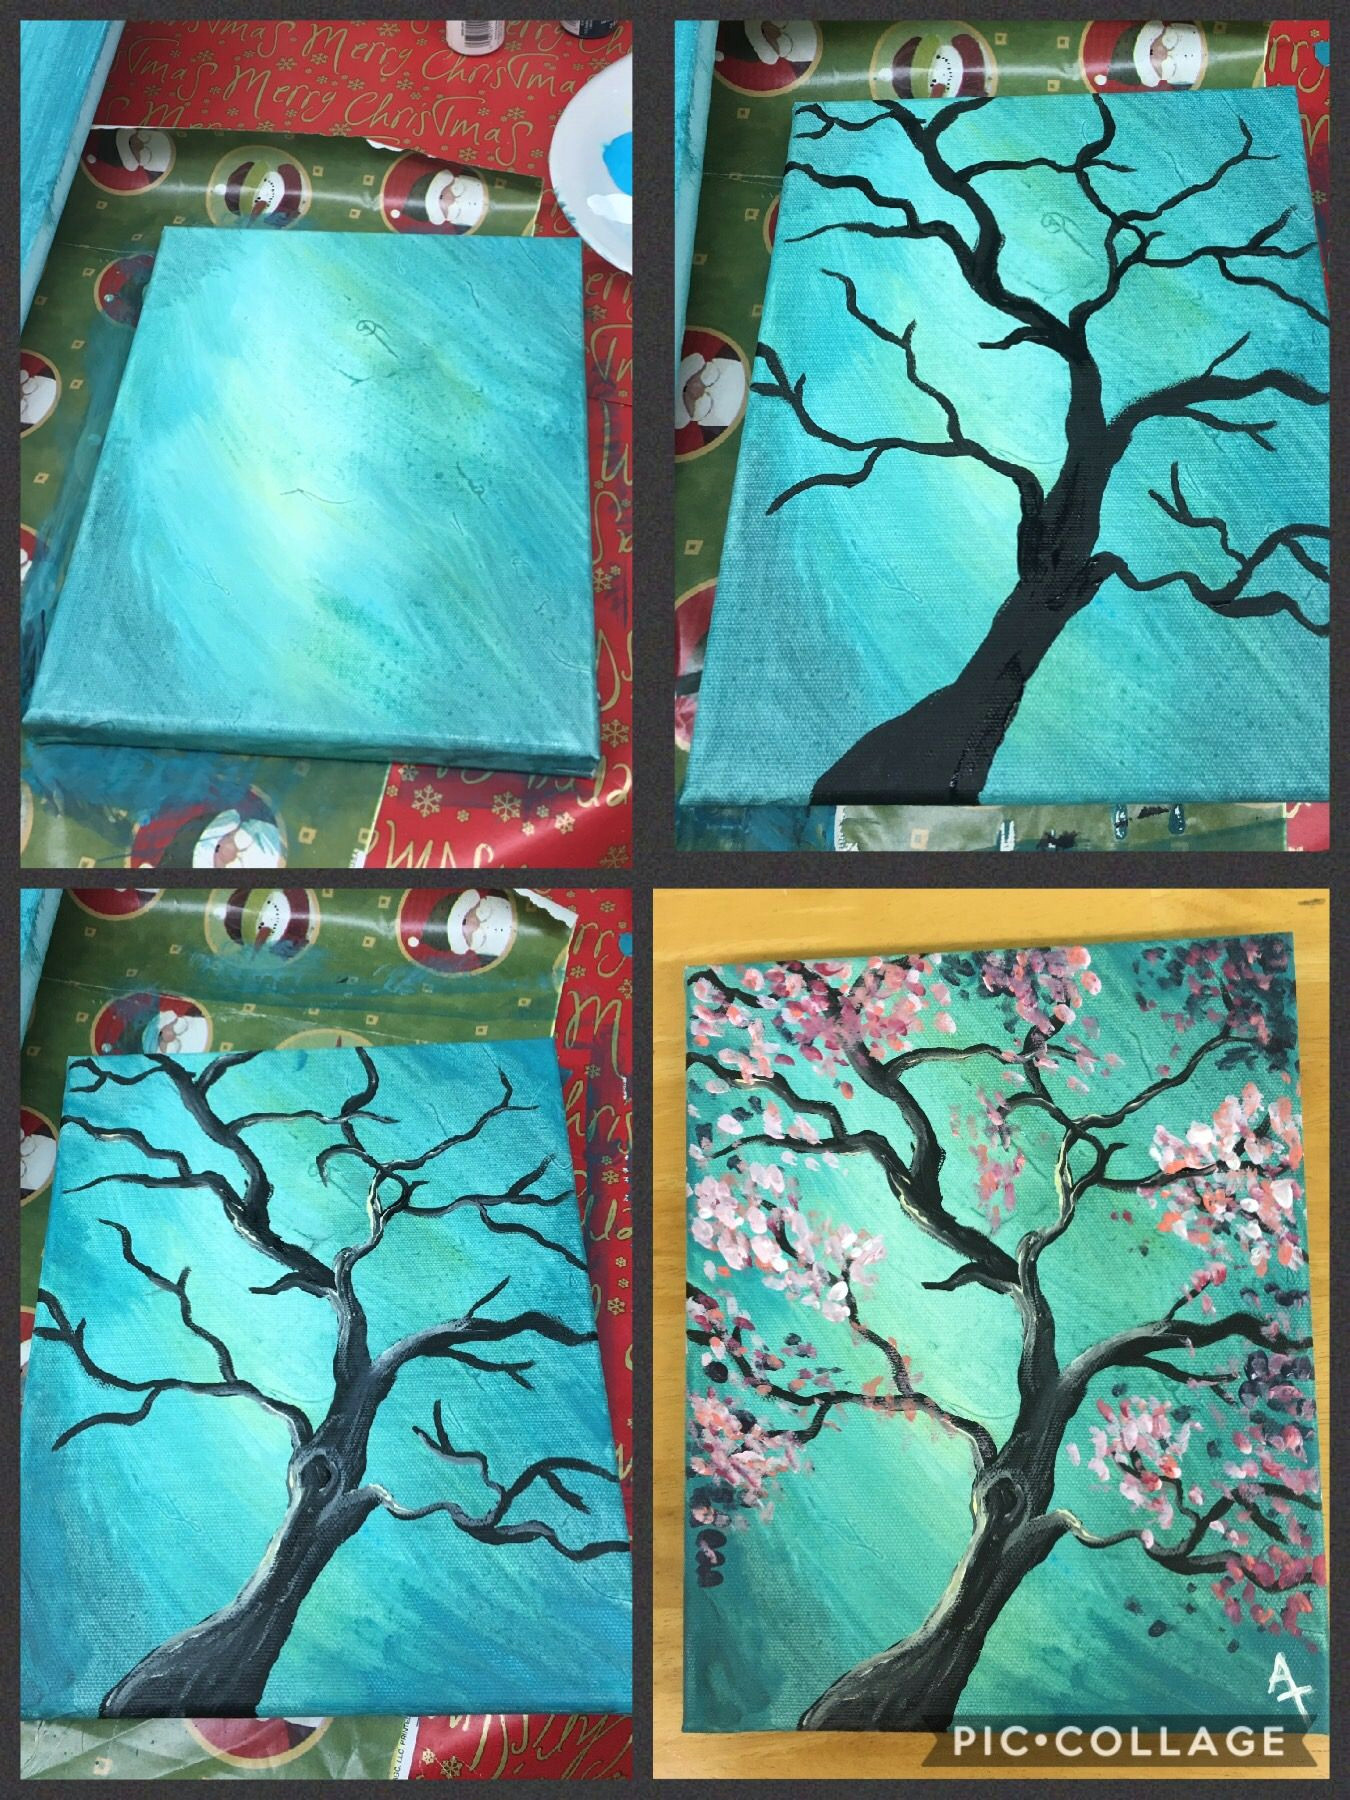 Easy Drawings Of Nature with Colour Step by Step Pink Flowering Tree Painting with Pretty Teal Blue